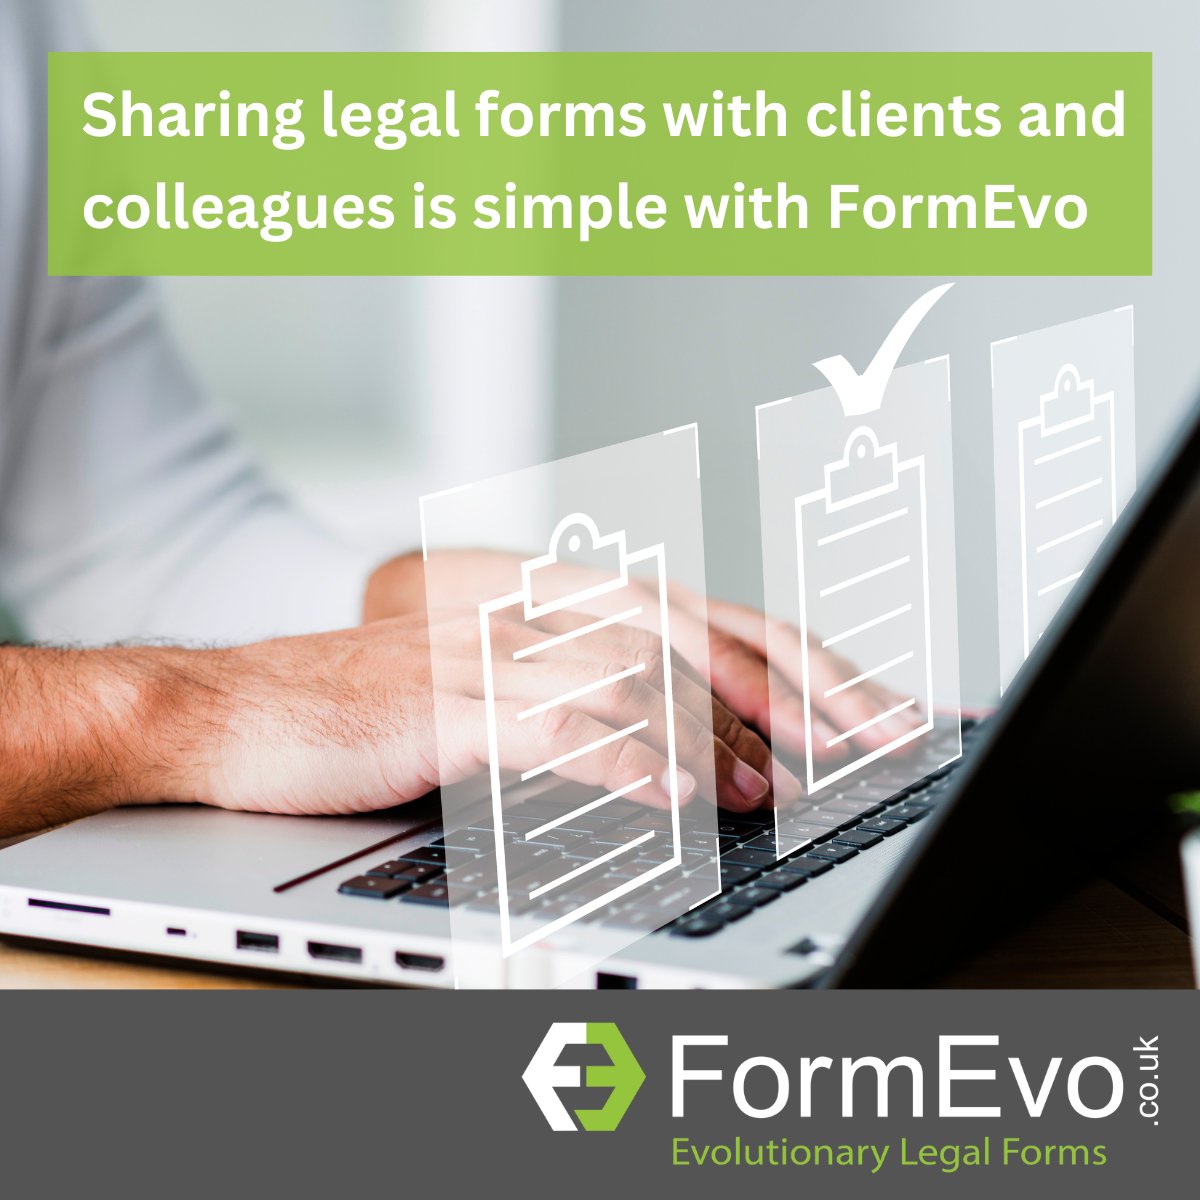 With FormEvo it’s easy to share #legalforms with your #lawfirm colleagues to review, approve or edit, and with today’s #clients, why not share with them too with #EvoVault. #FormEvo #SDLT #conveyancing #legaltech #legalforms #privateclient #willsandprobate #estateplanning